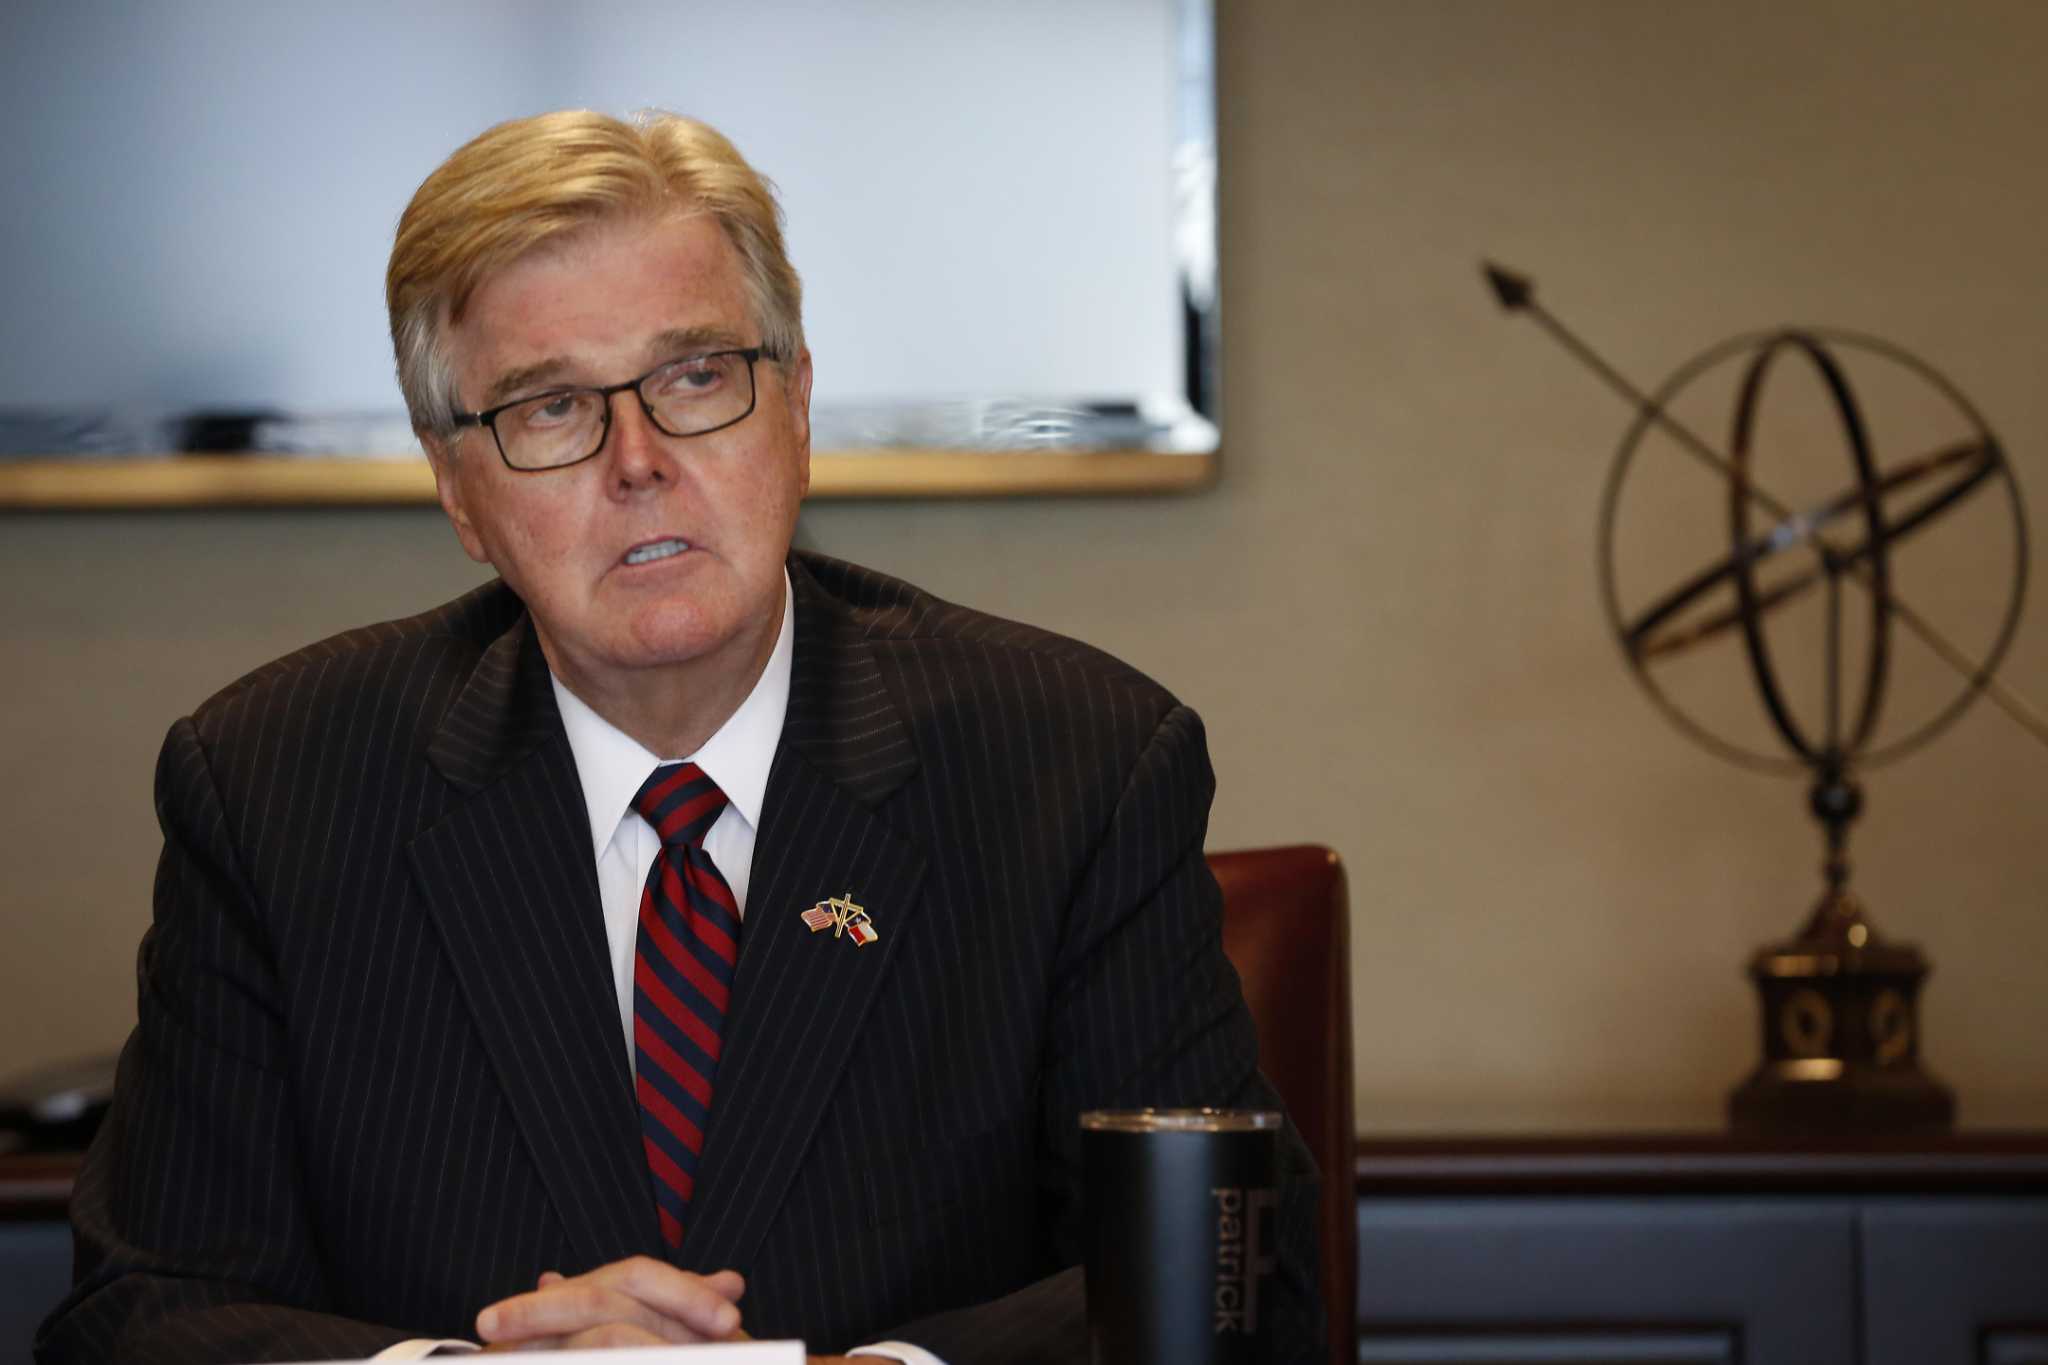 Lt. Governor Dan Patrick claims ‘nothing has changed’ with early Texas vote